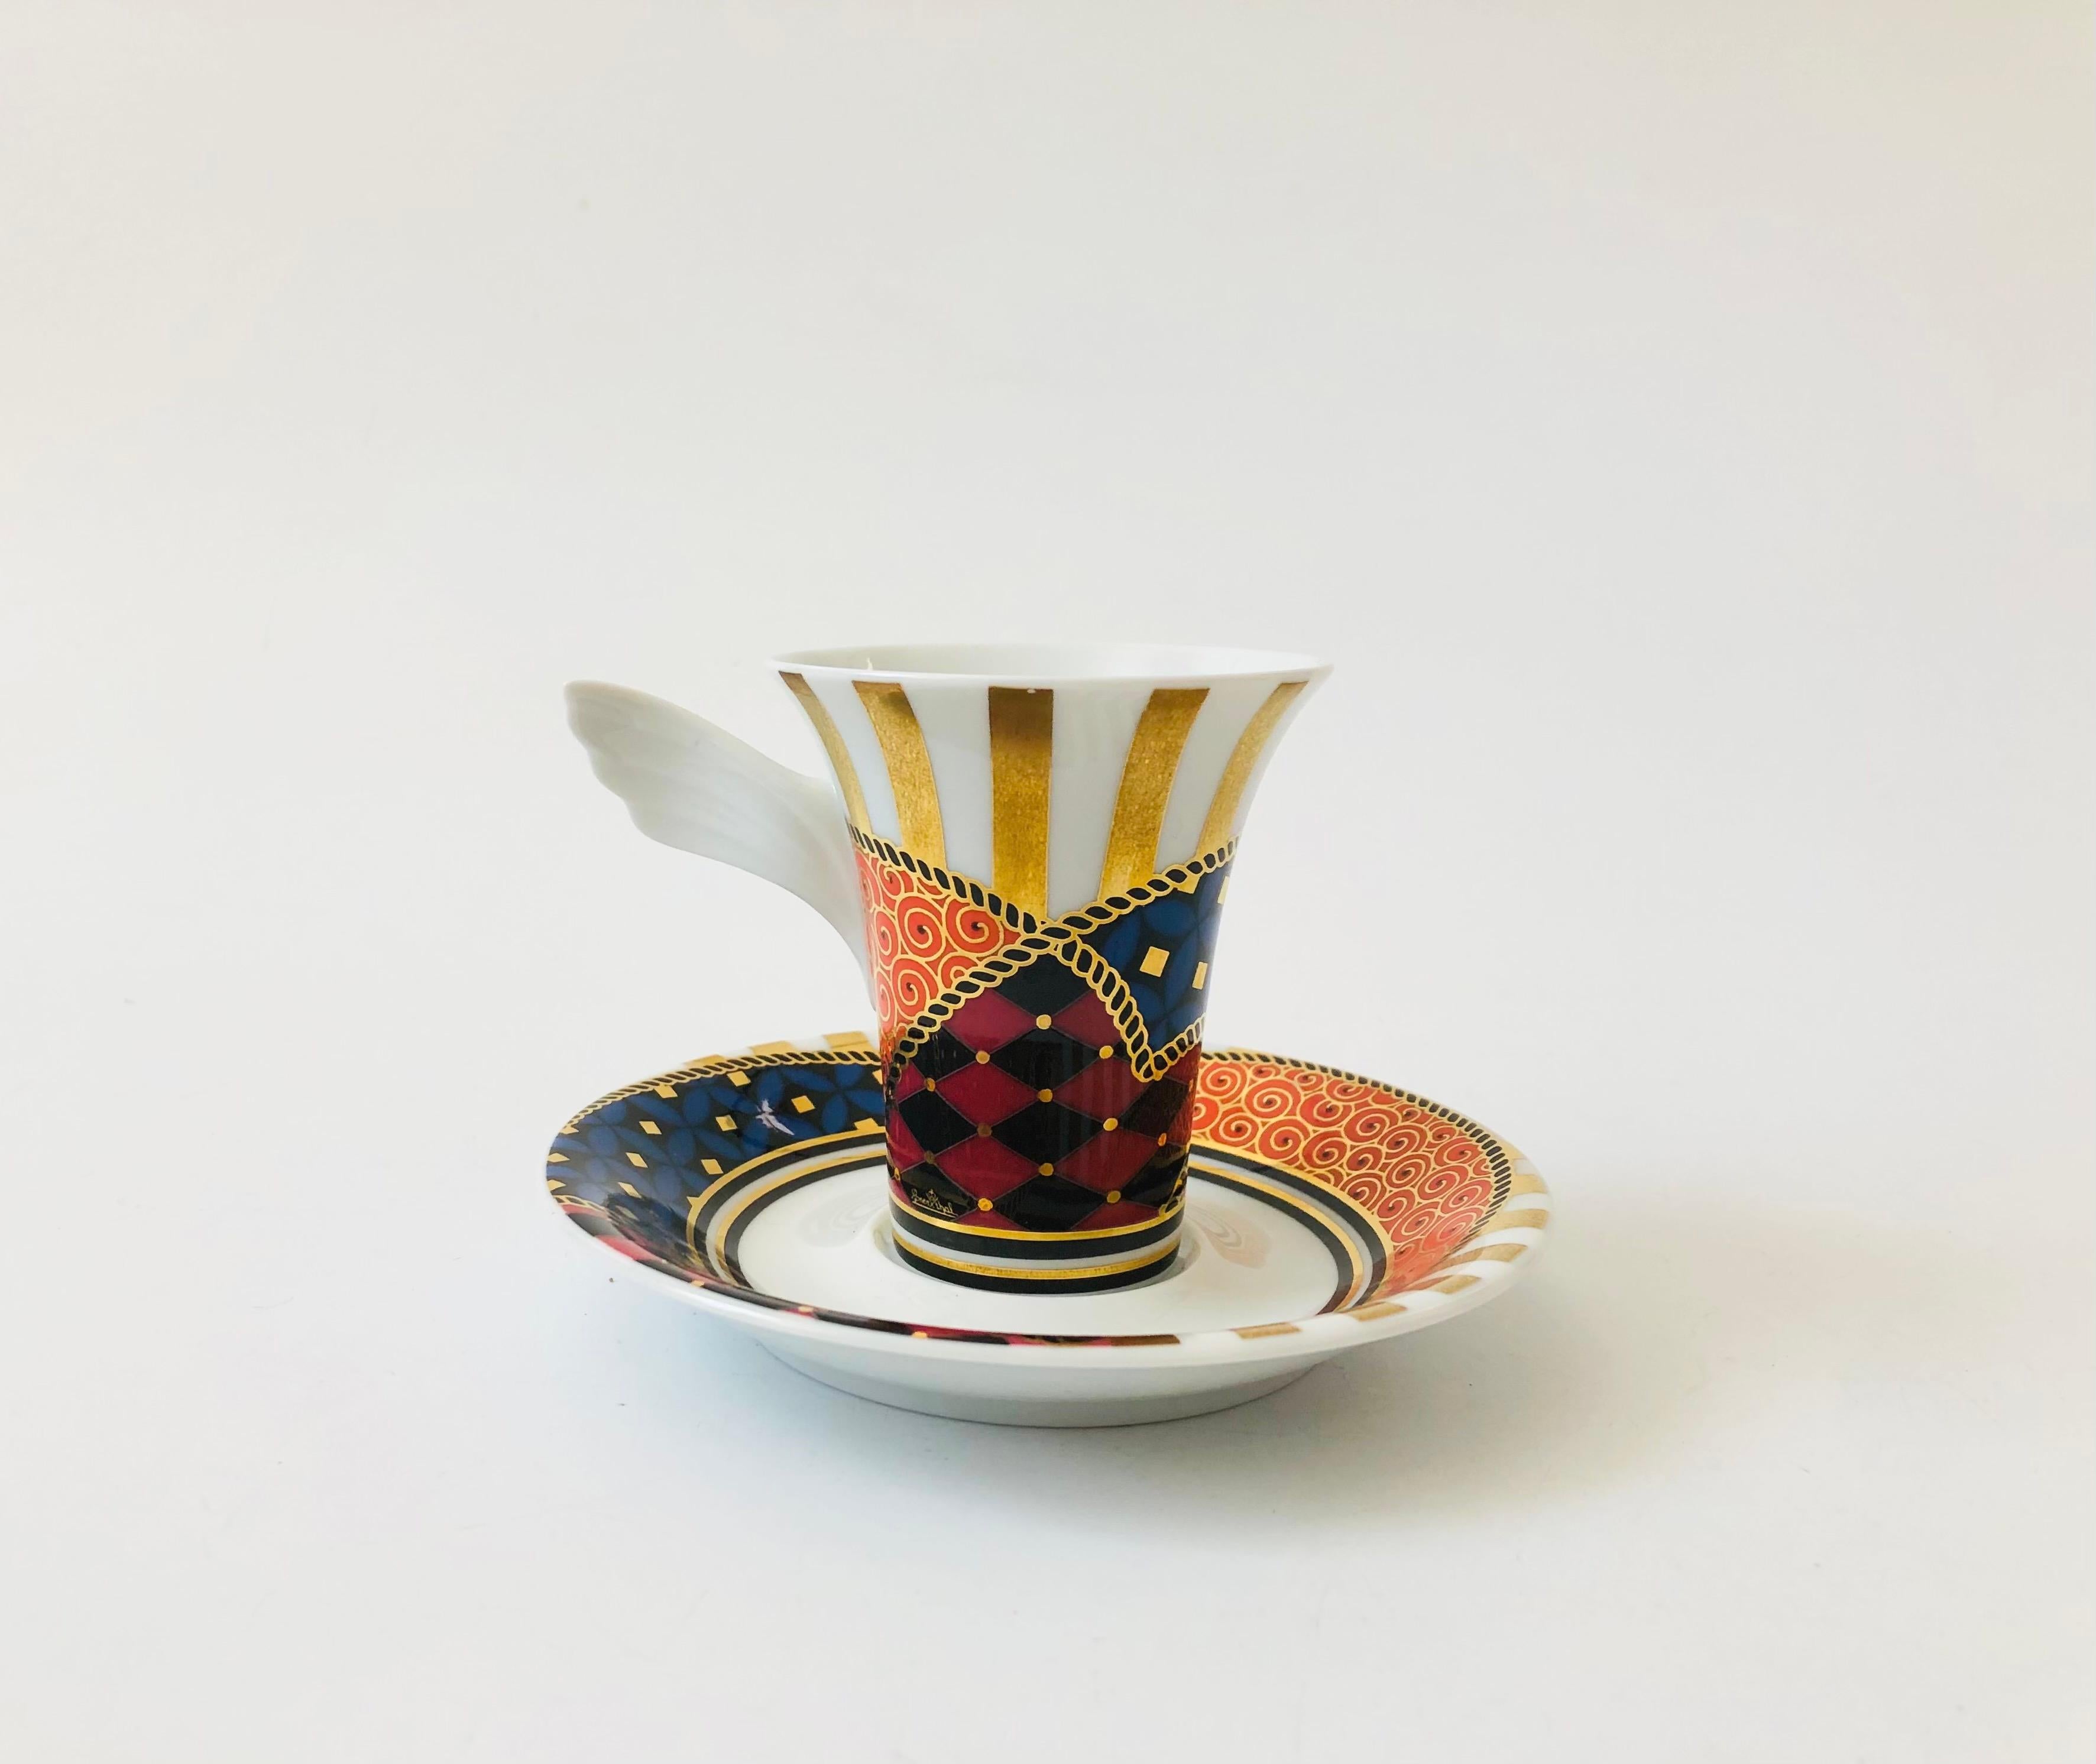 A vintage collectible porcelain espresso mug and saucer set from the Mythos line by Rosenthal, Germany. Signed by the designer, Yang, and numbered NR 4. Features an intricate matching design on the cup and saucer with a winged handle.